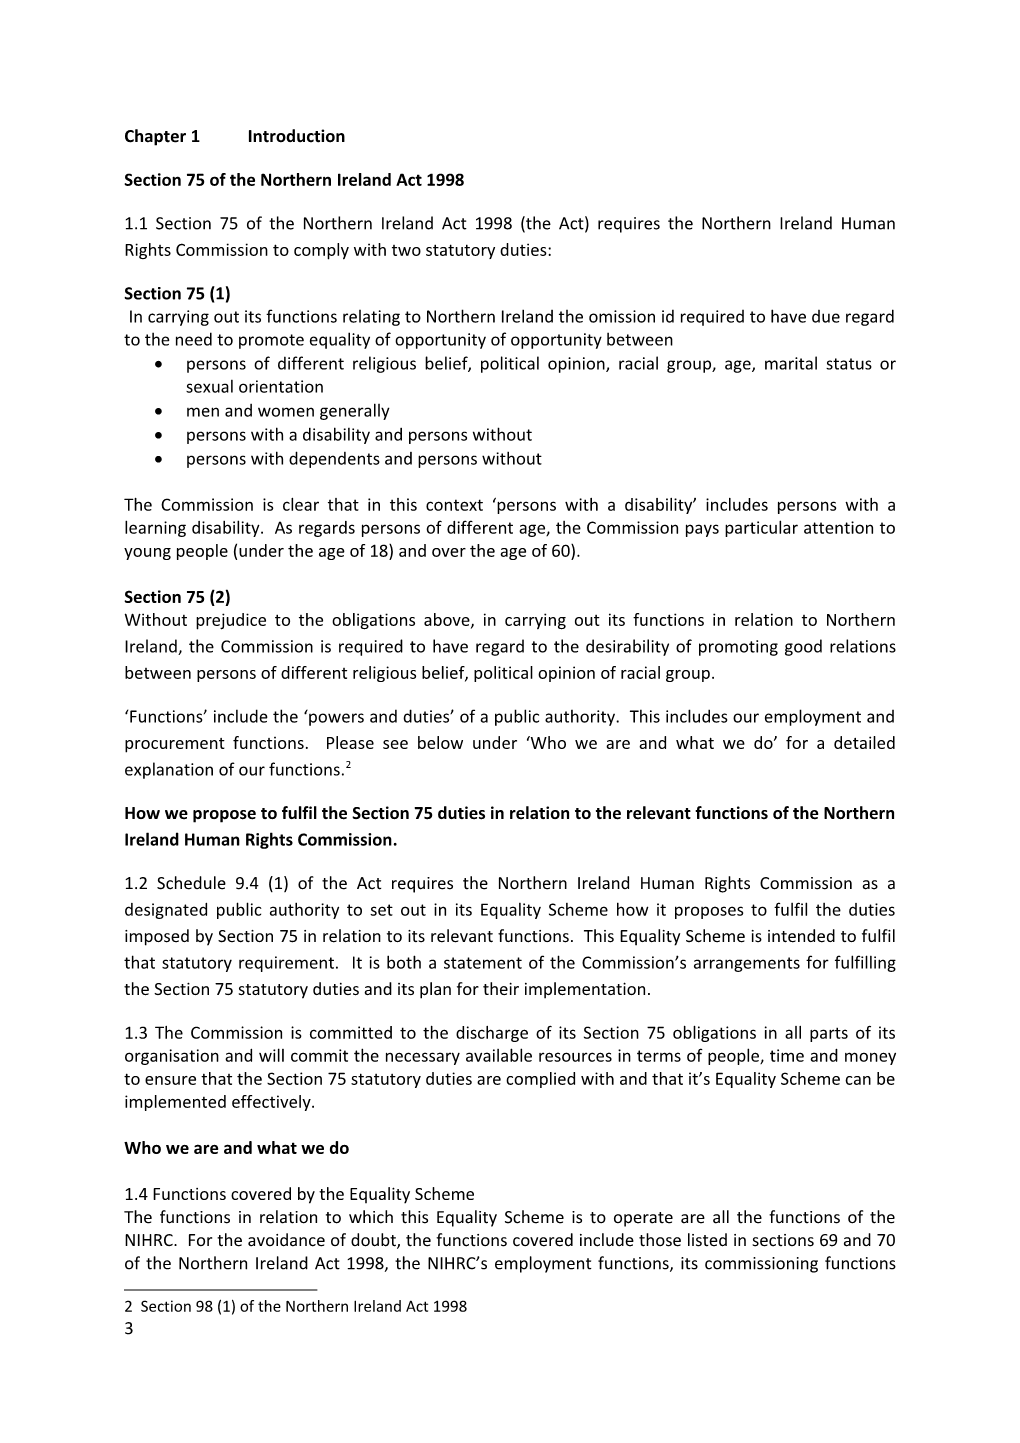 (Draft) Revised Equality Scheme for the Northern Ireland Human Rights Commission